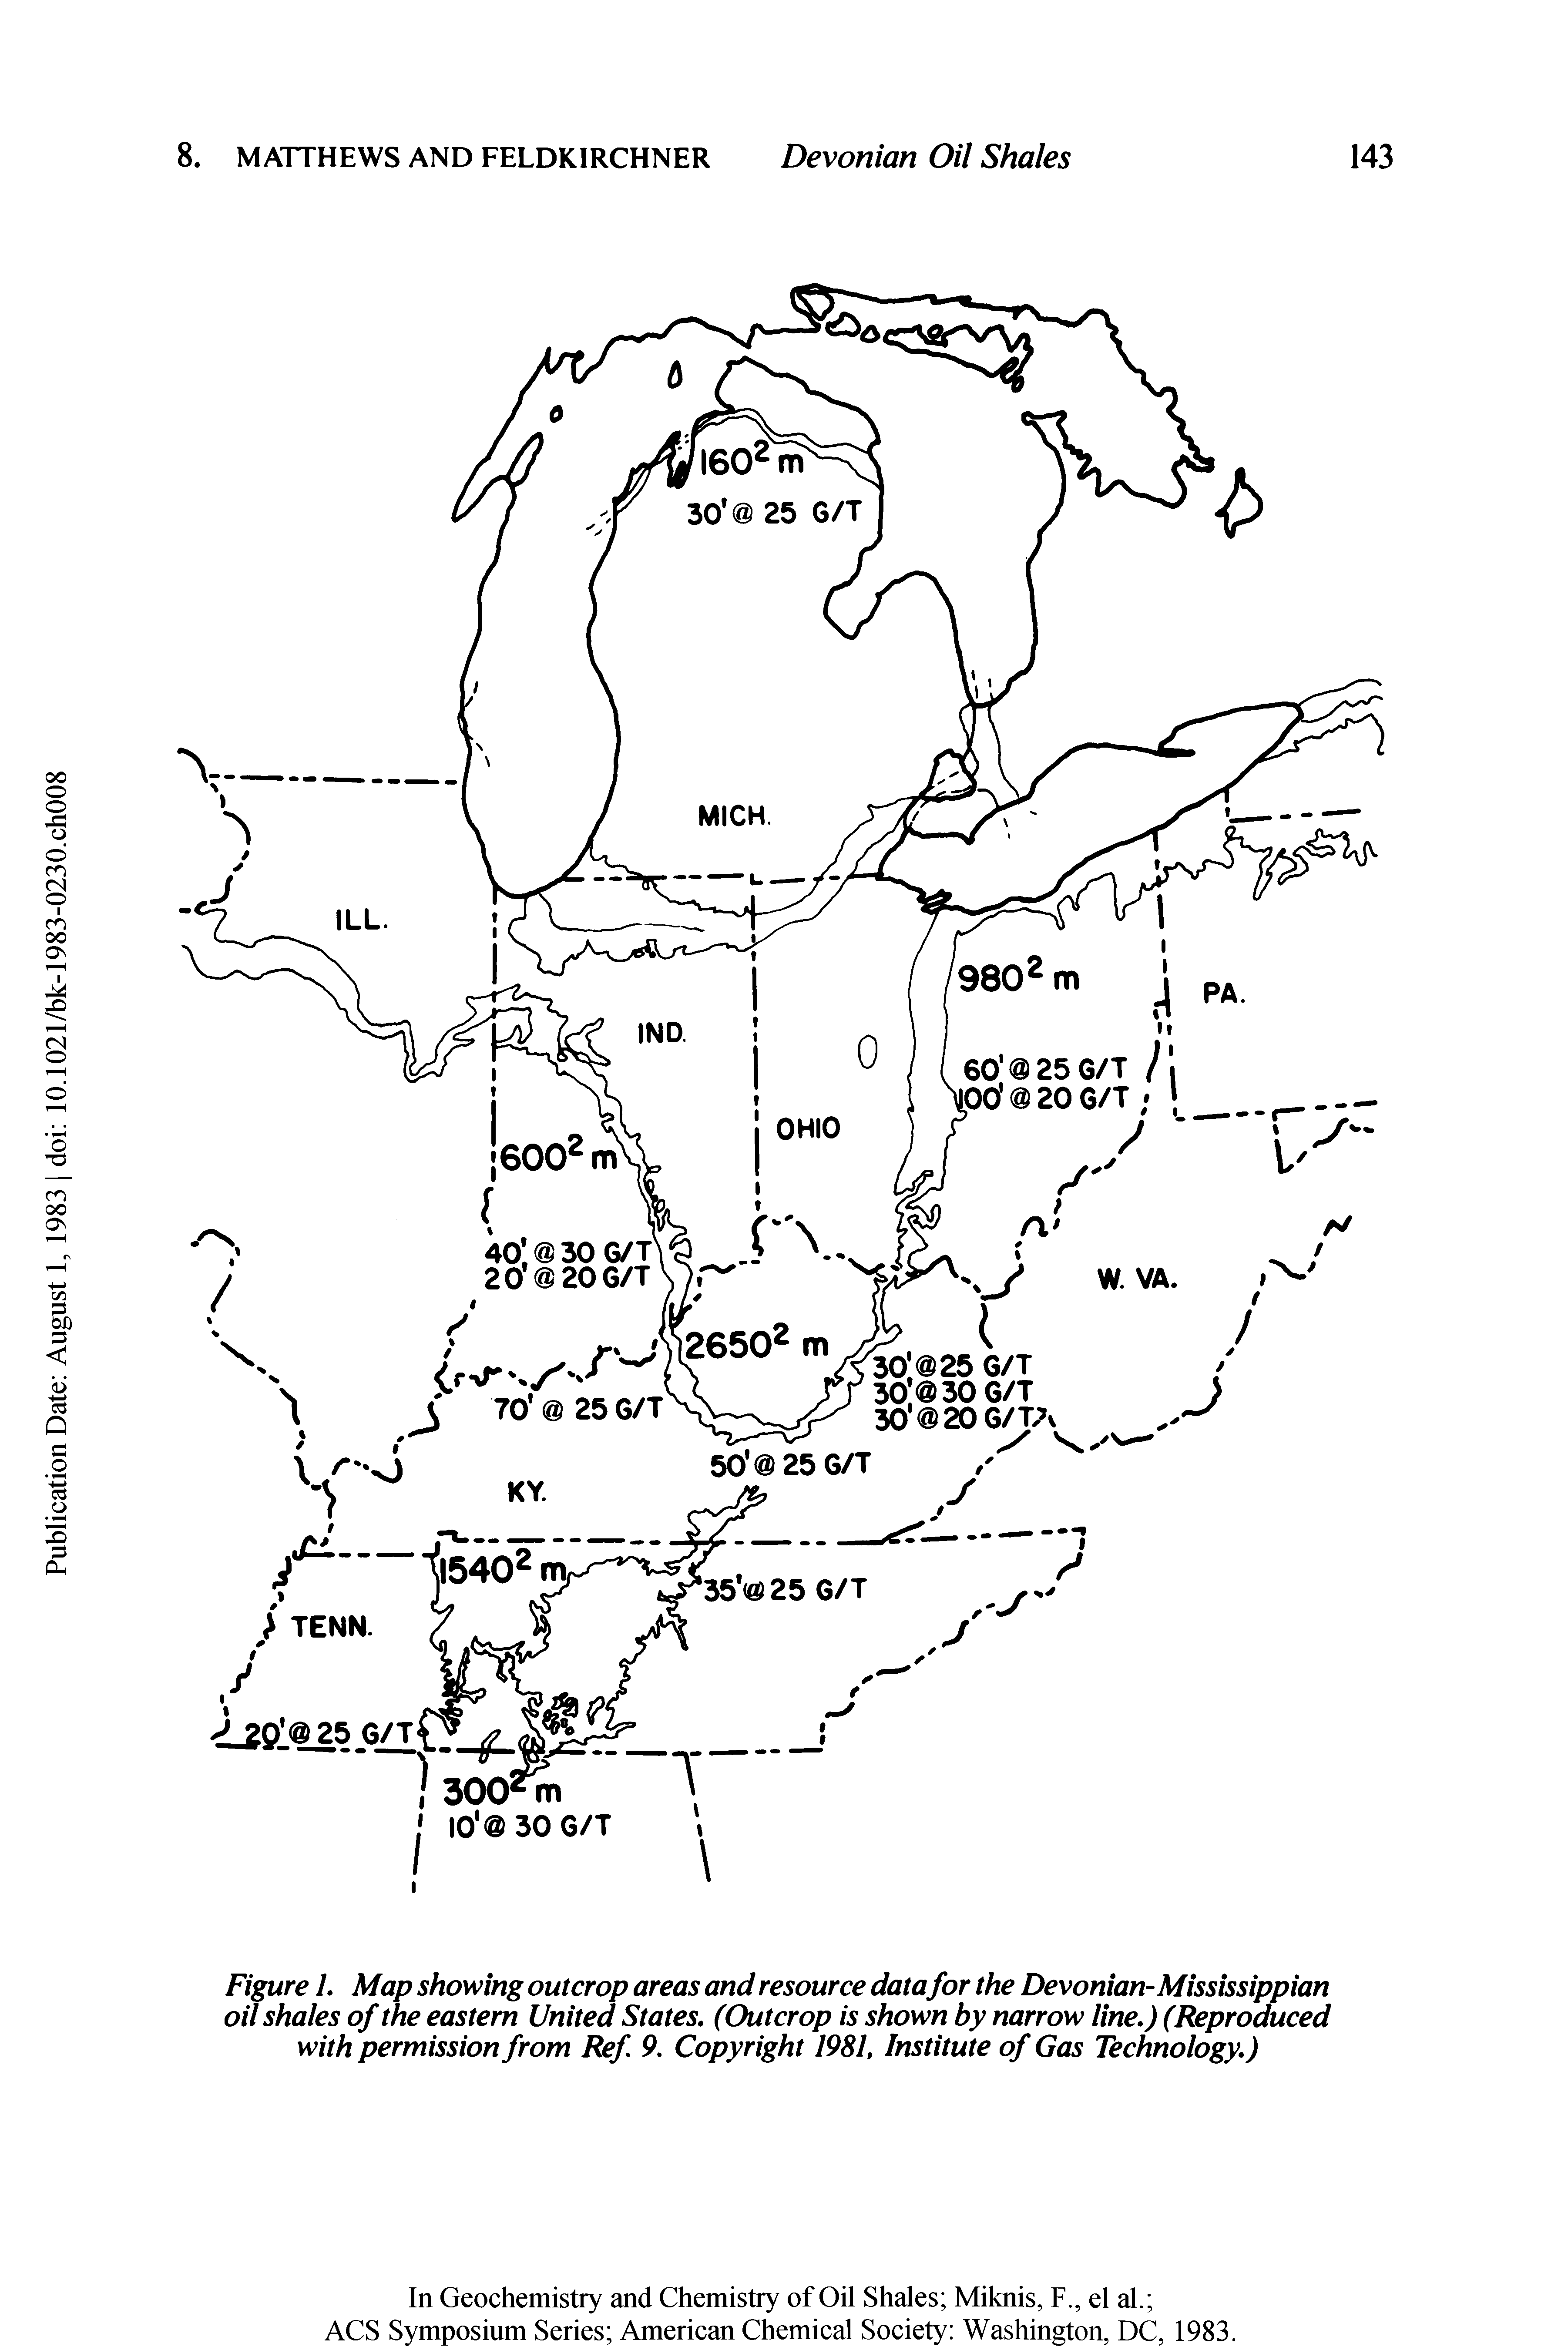 Figure 1. Map showing outcrop areas and resource data for the Devonian-Mississippian oil shales of the eastern United States. (Outcrop is shown by narrow line.) (Reproduced with permission from Ref 9. Copyright 1981, Institute of Gas Technology.)...